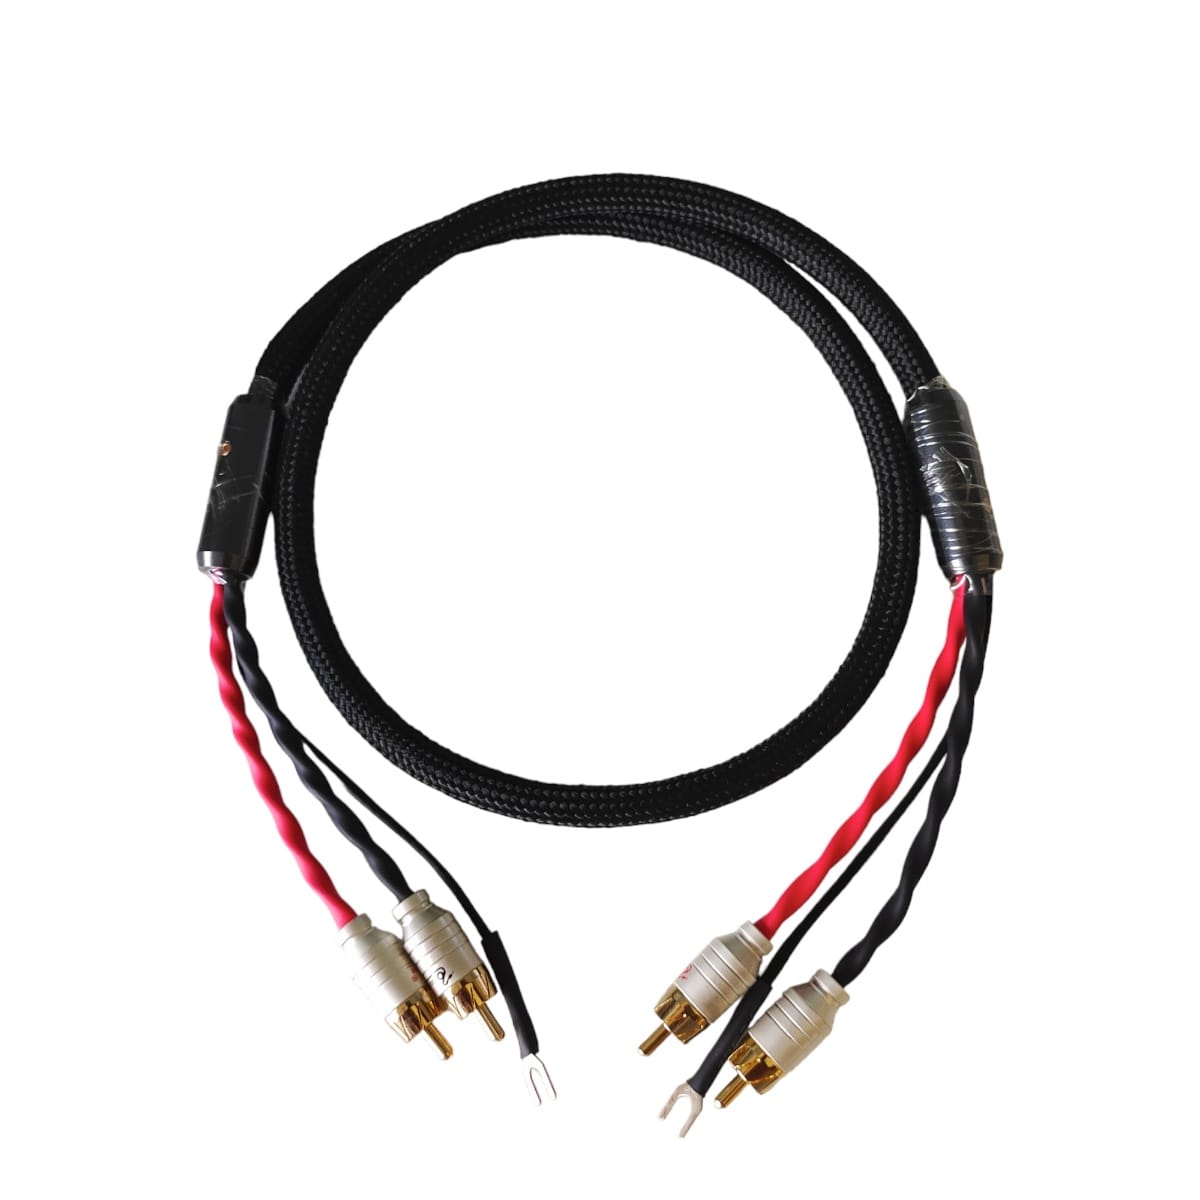 EarAudio Ground Patch RCA Male To RCA Male Interconnects Cable